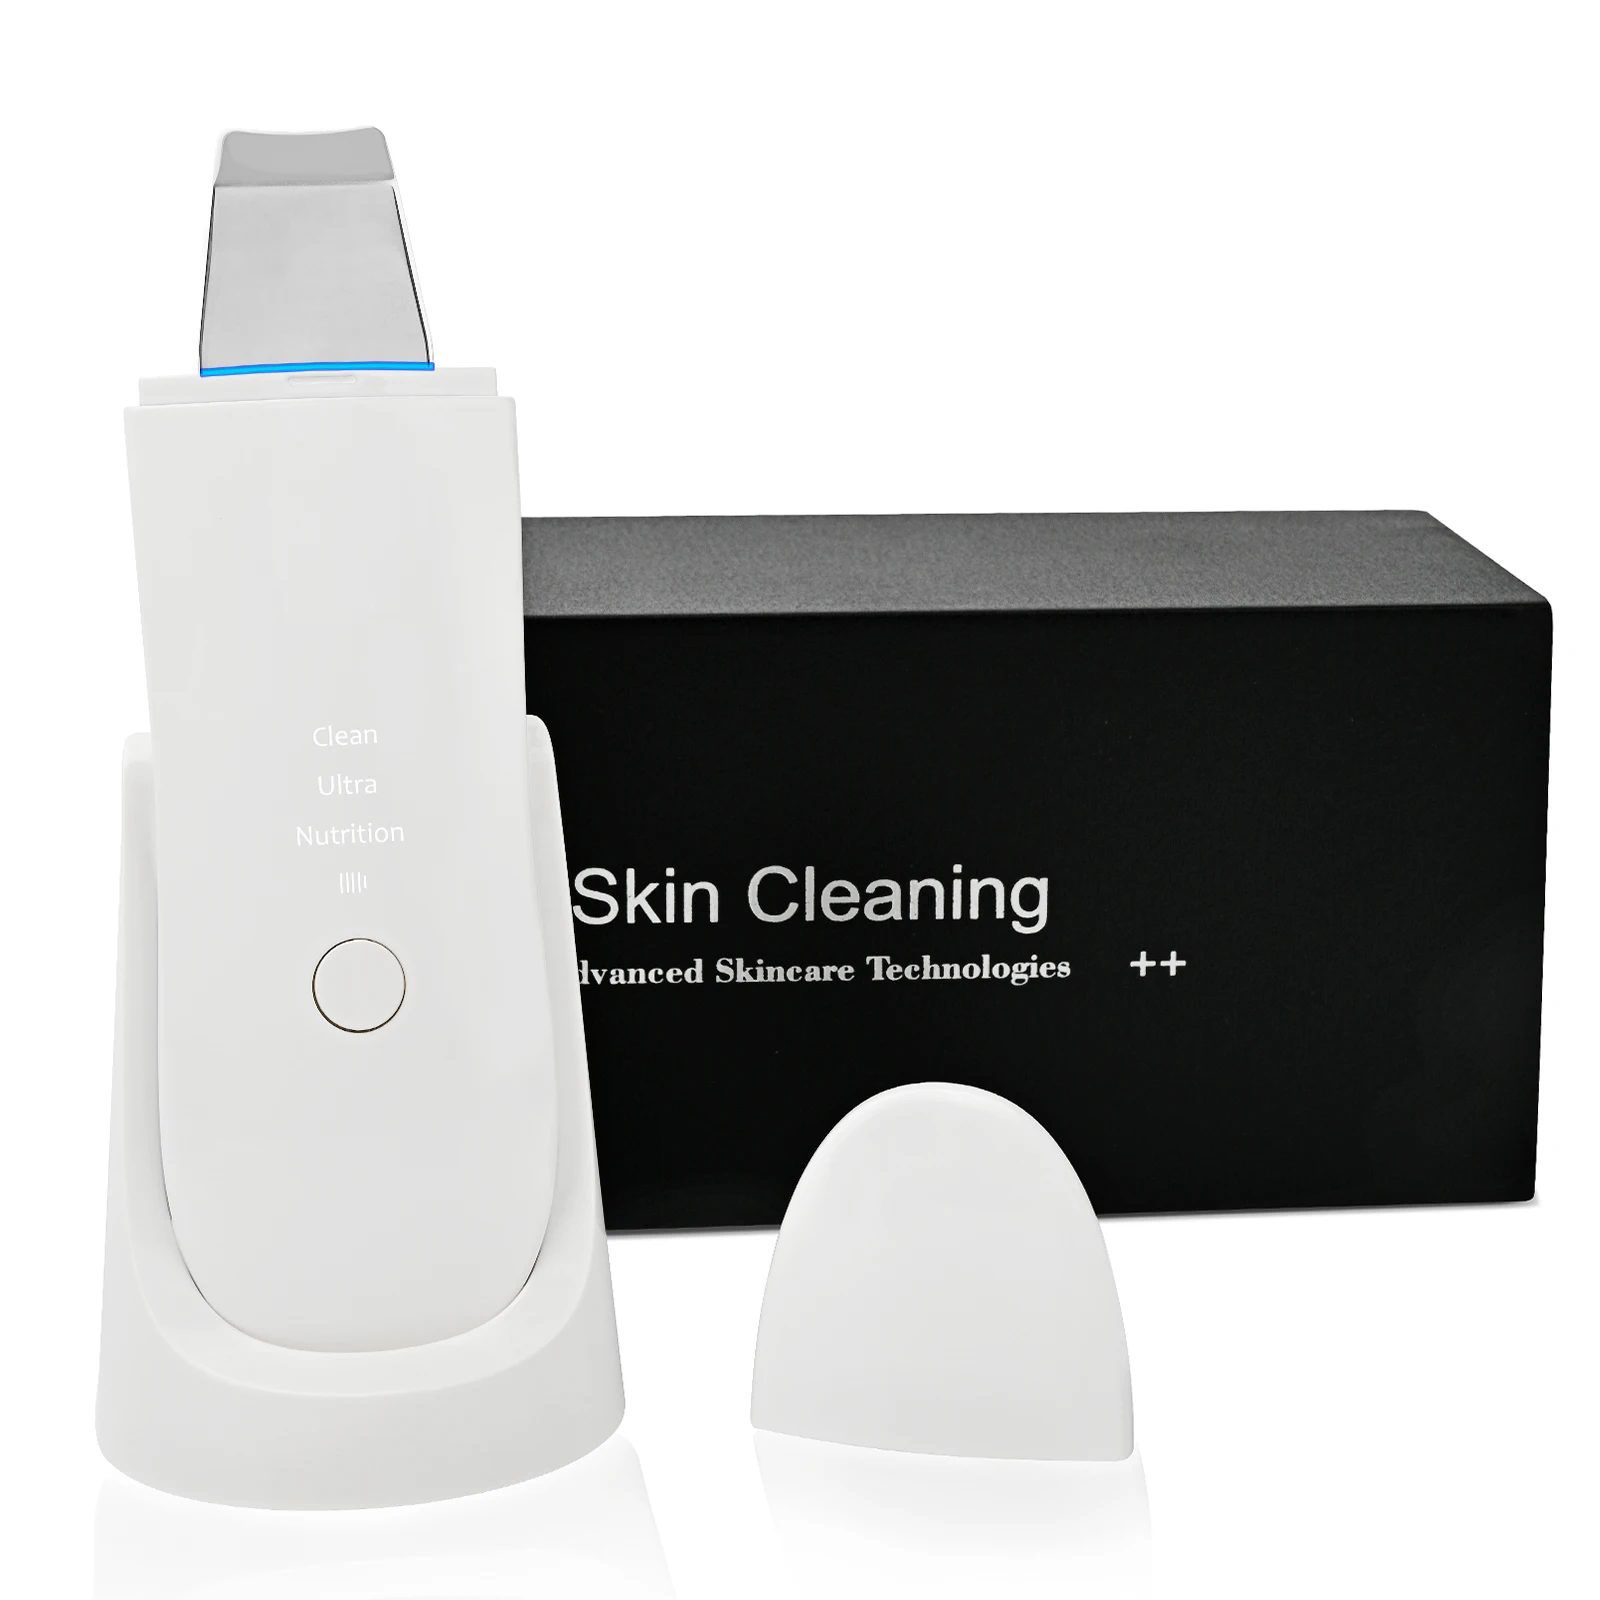 

Ultrasonic Skin Scrubber Deep Face Cleansing Machine Peeling Shovel Facial Pore Cleaner Blackhead Removal Lifting Device